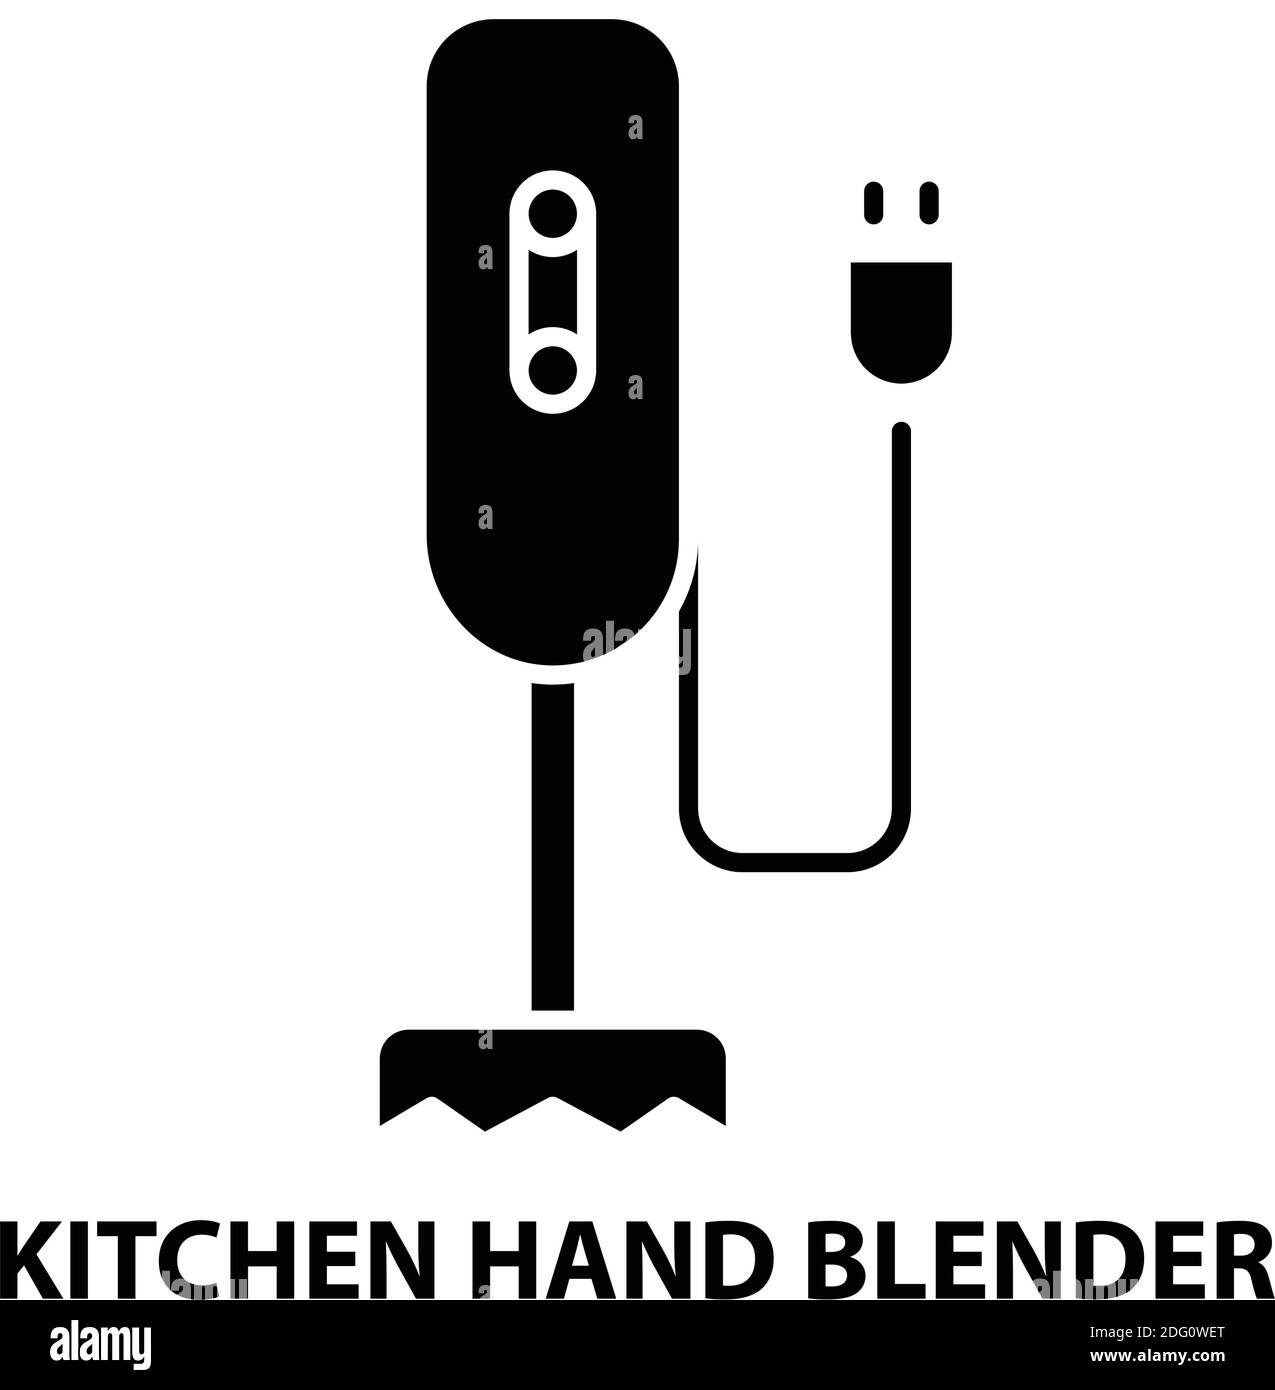 kitchen hand blender icon, black vector sign with editable strokes, concept illustration Stock Vector